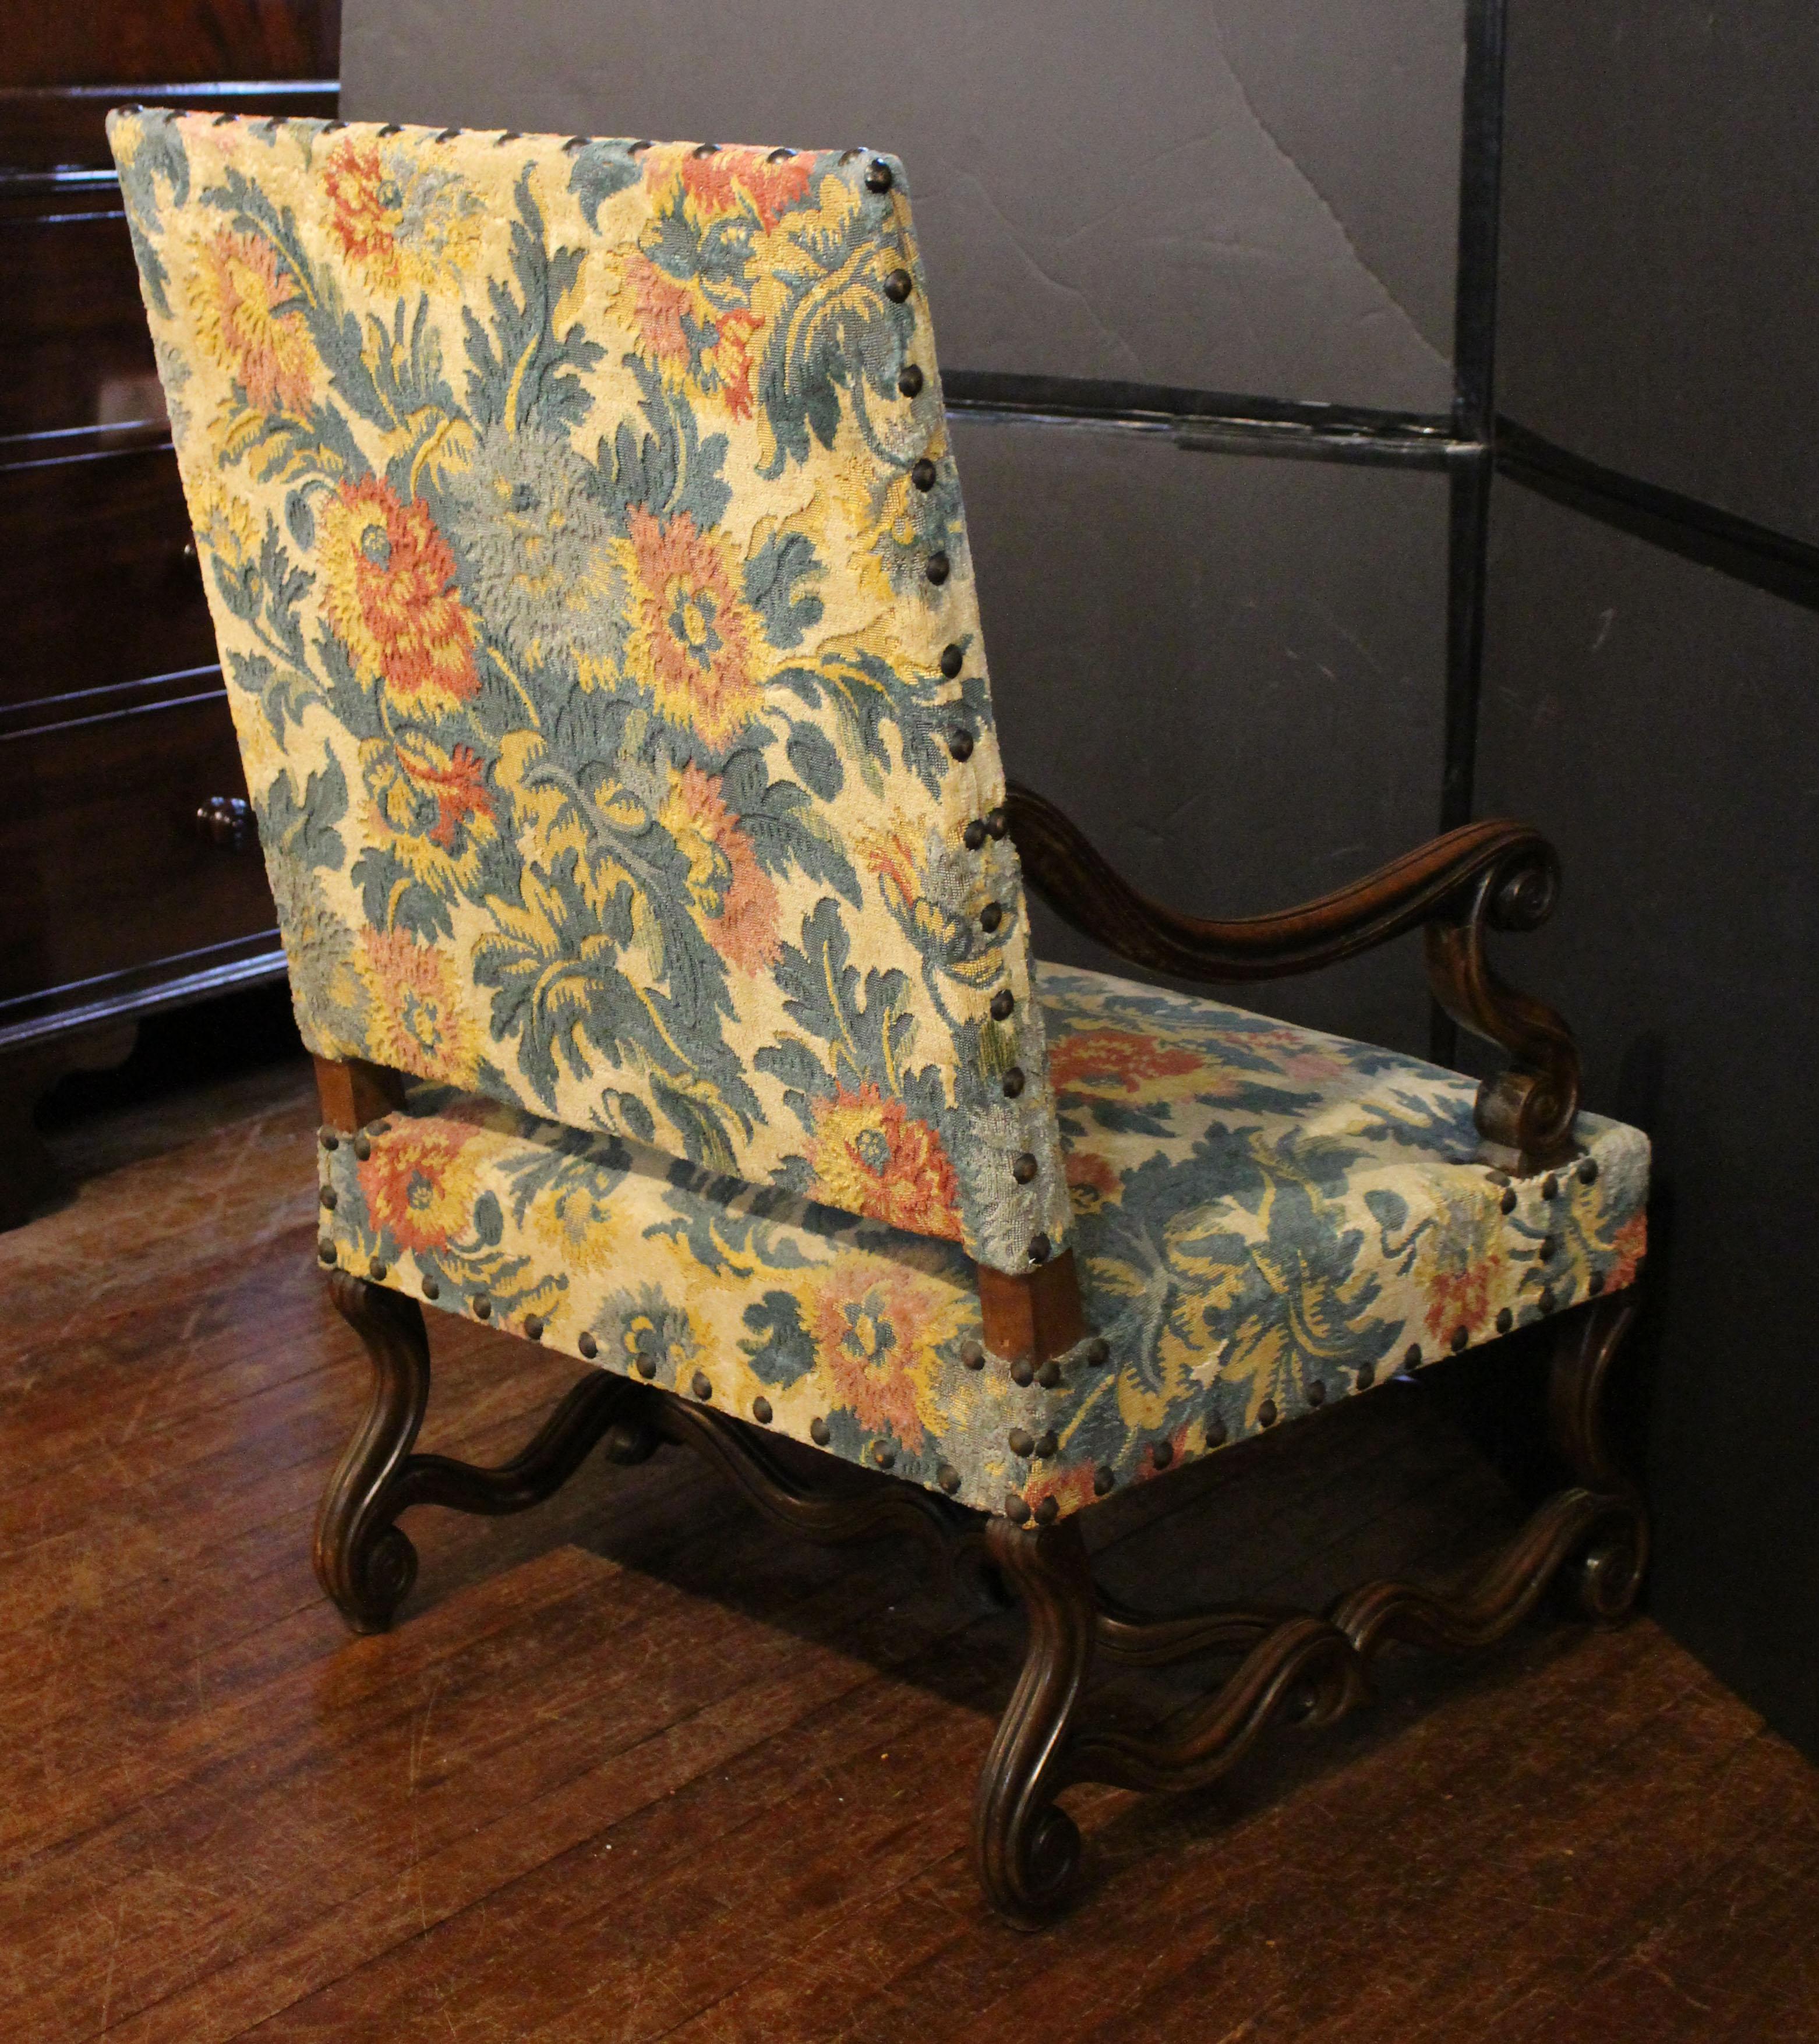 Circa 1870 French Grand Scale Regence Style Fauteuil For Sale 6